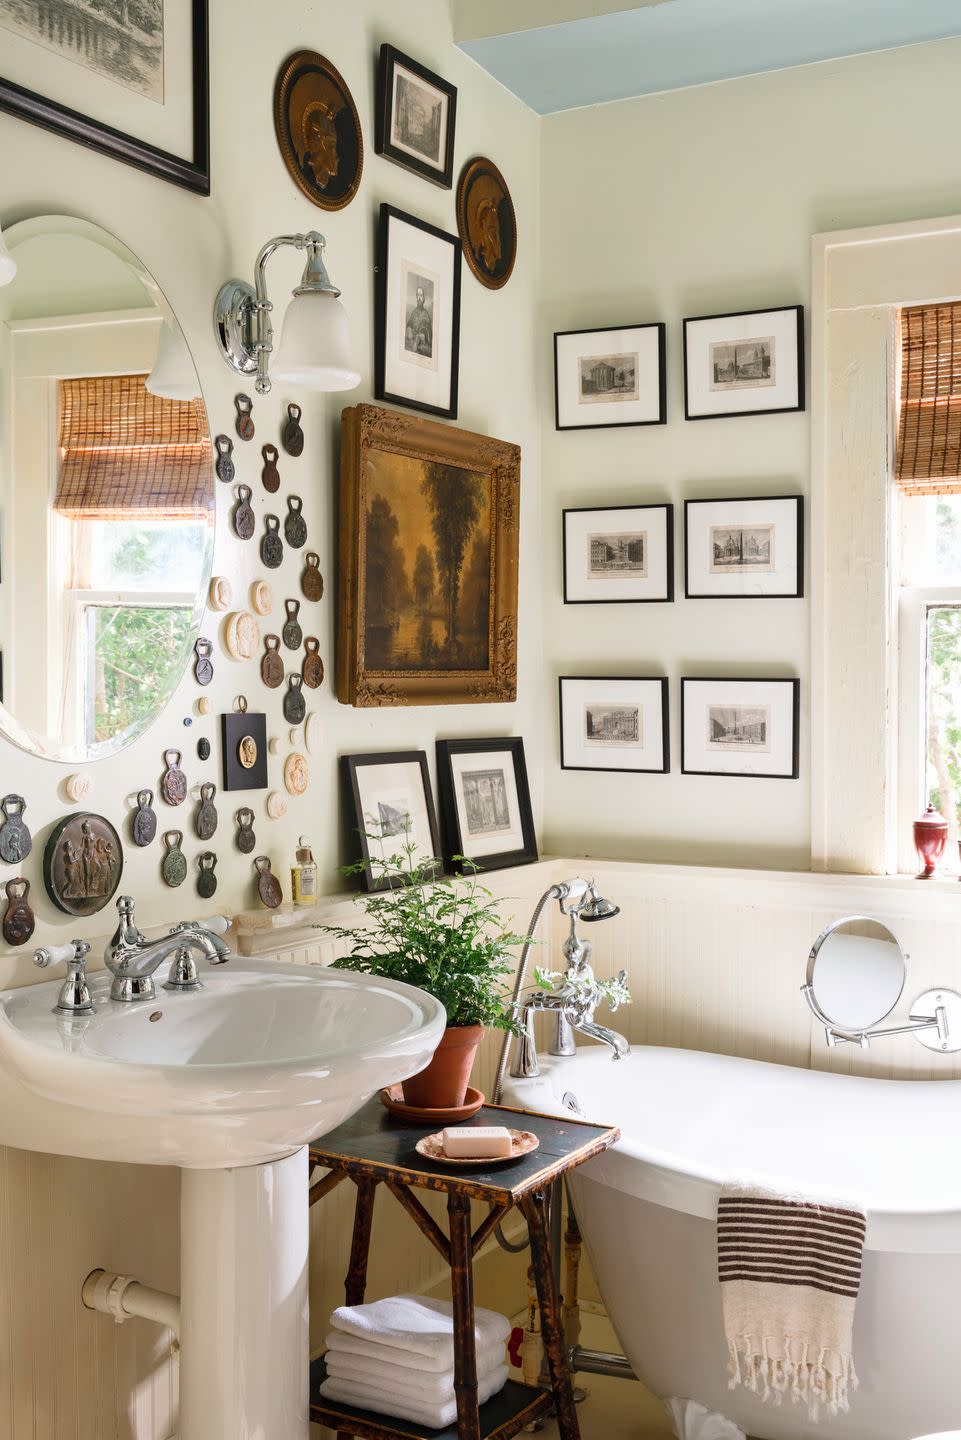 bathroom with collection of antique bottle openers and vintage tools hung on the wall